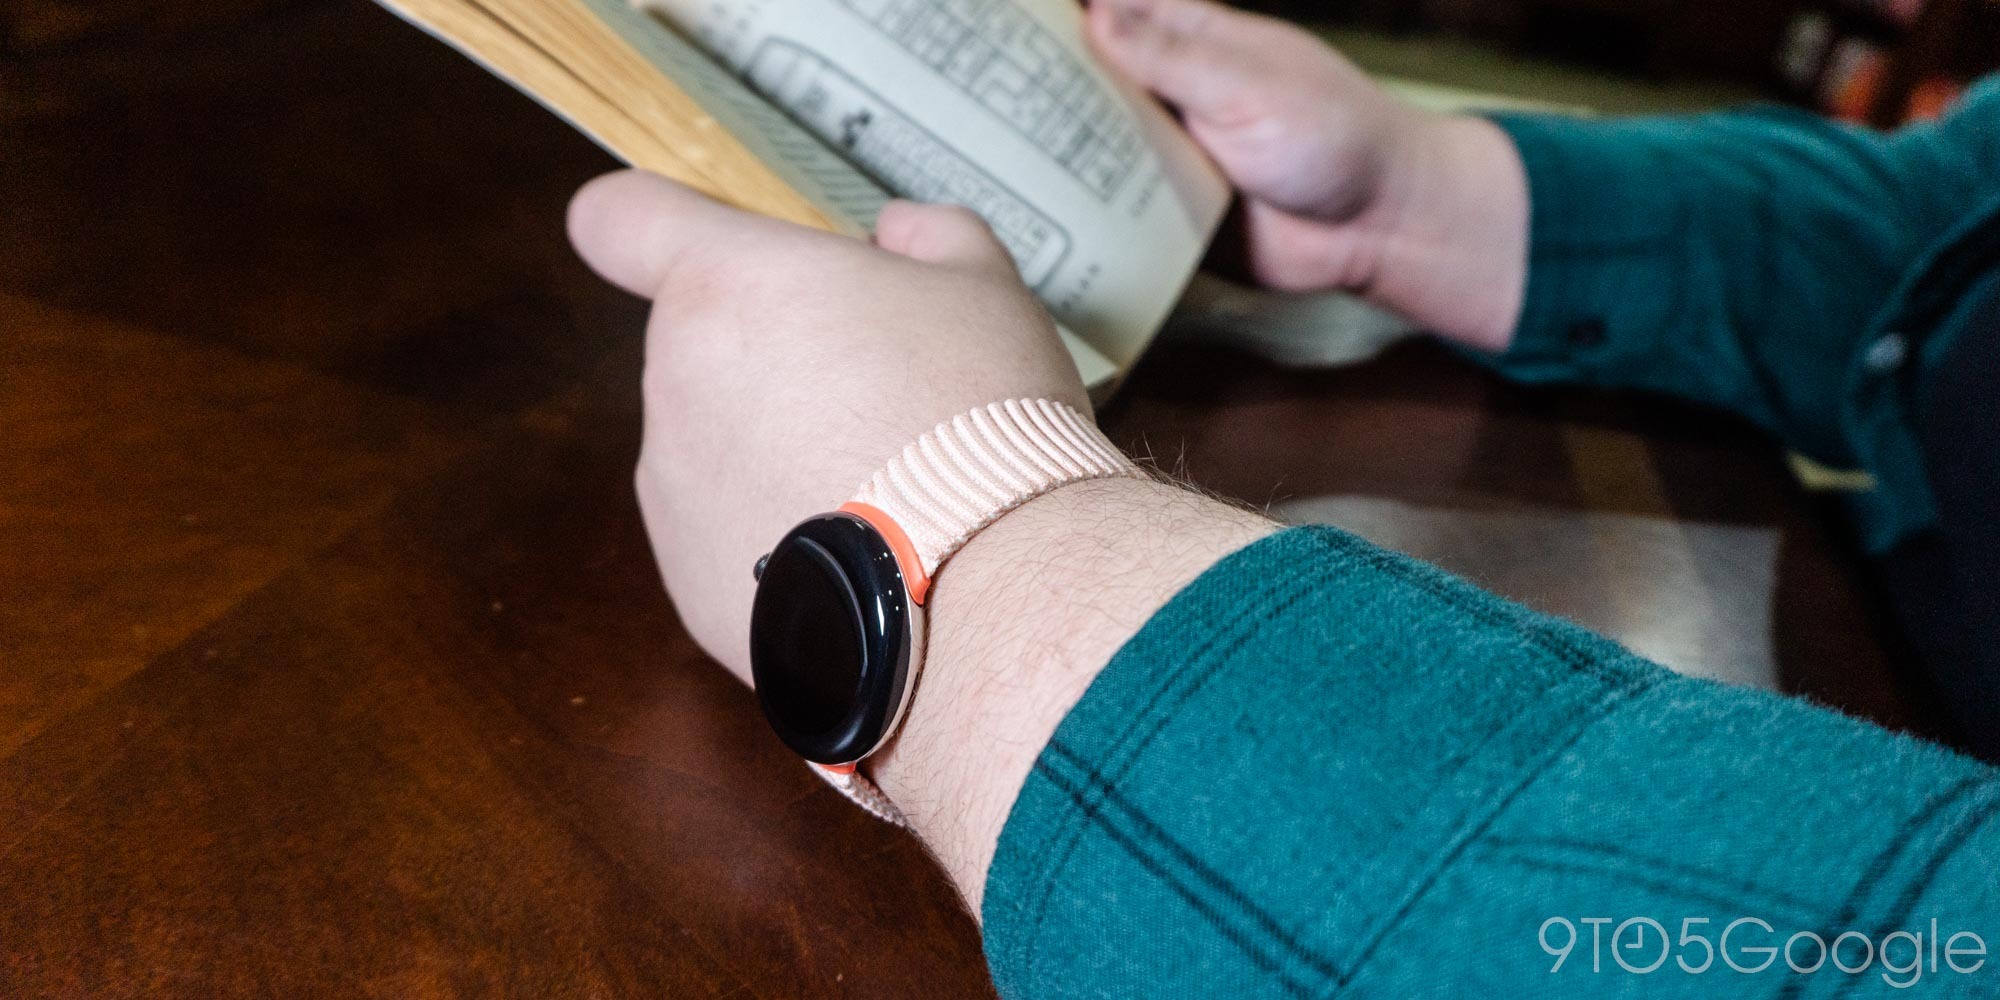 Review: Pixel Watch Stretch Band is soft like a warm, cozy sweater